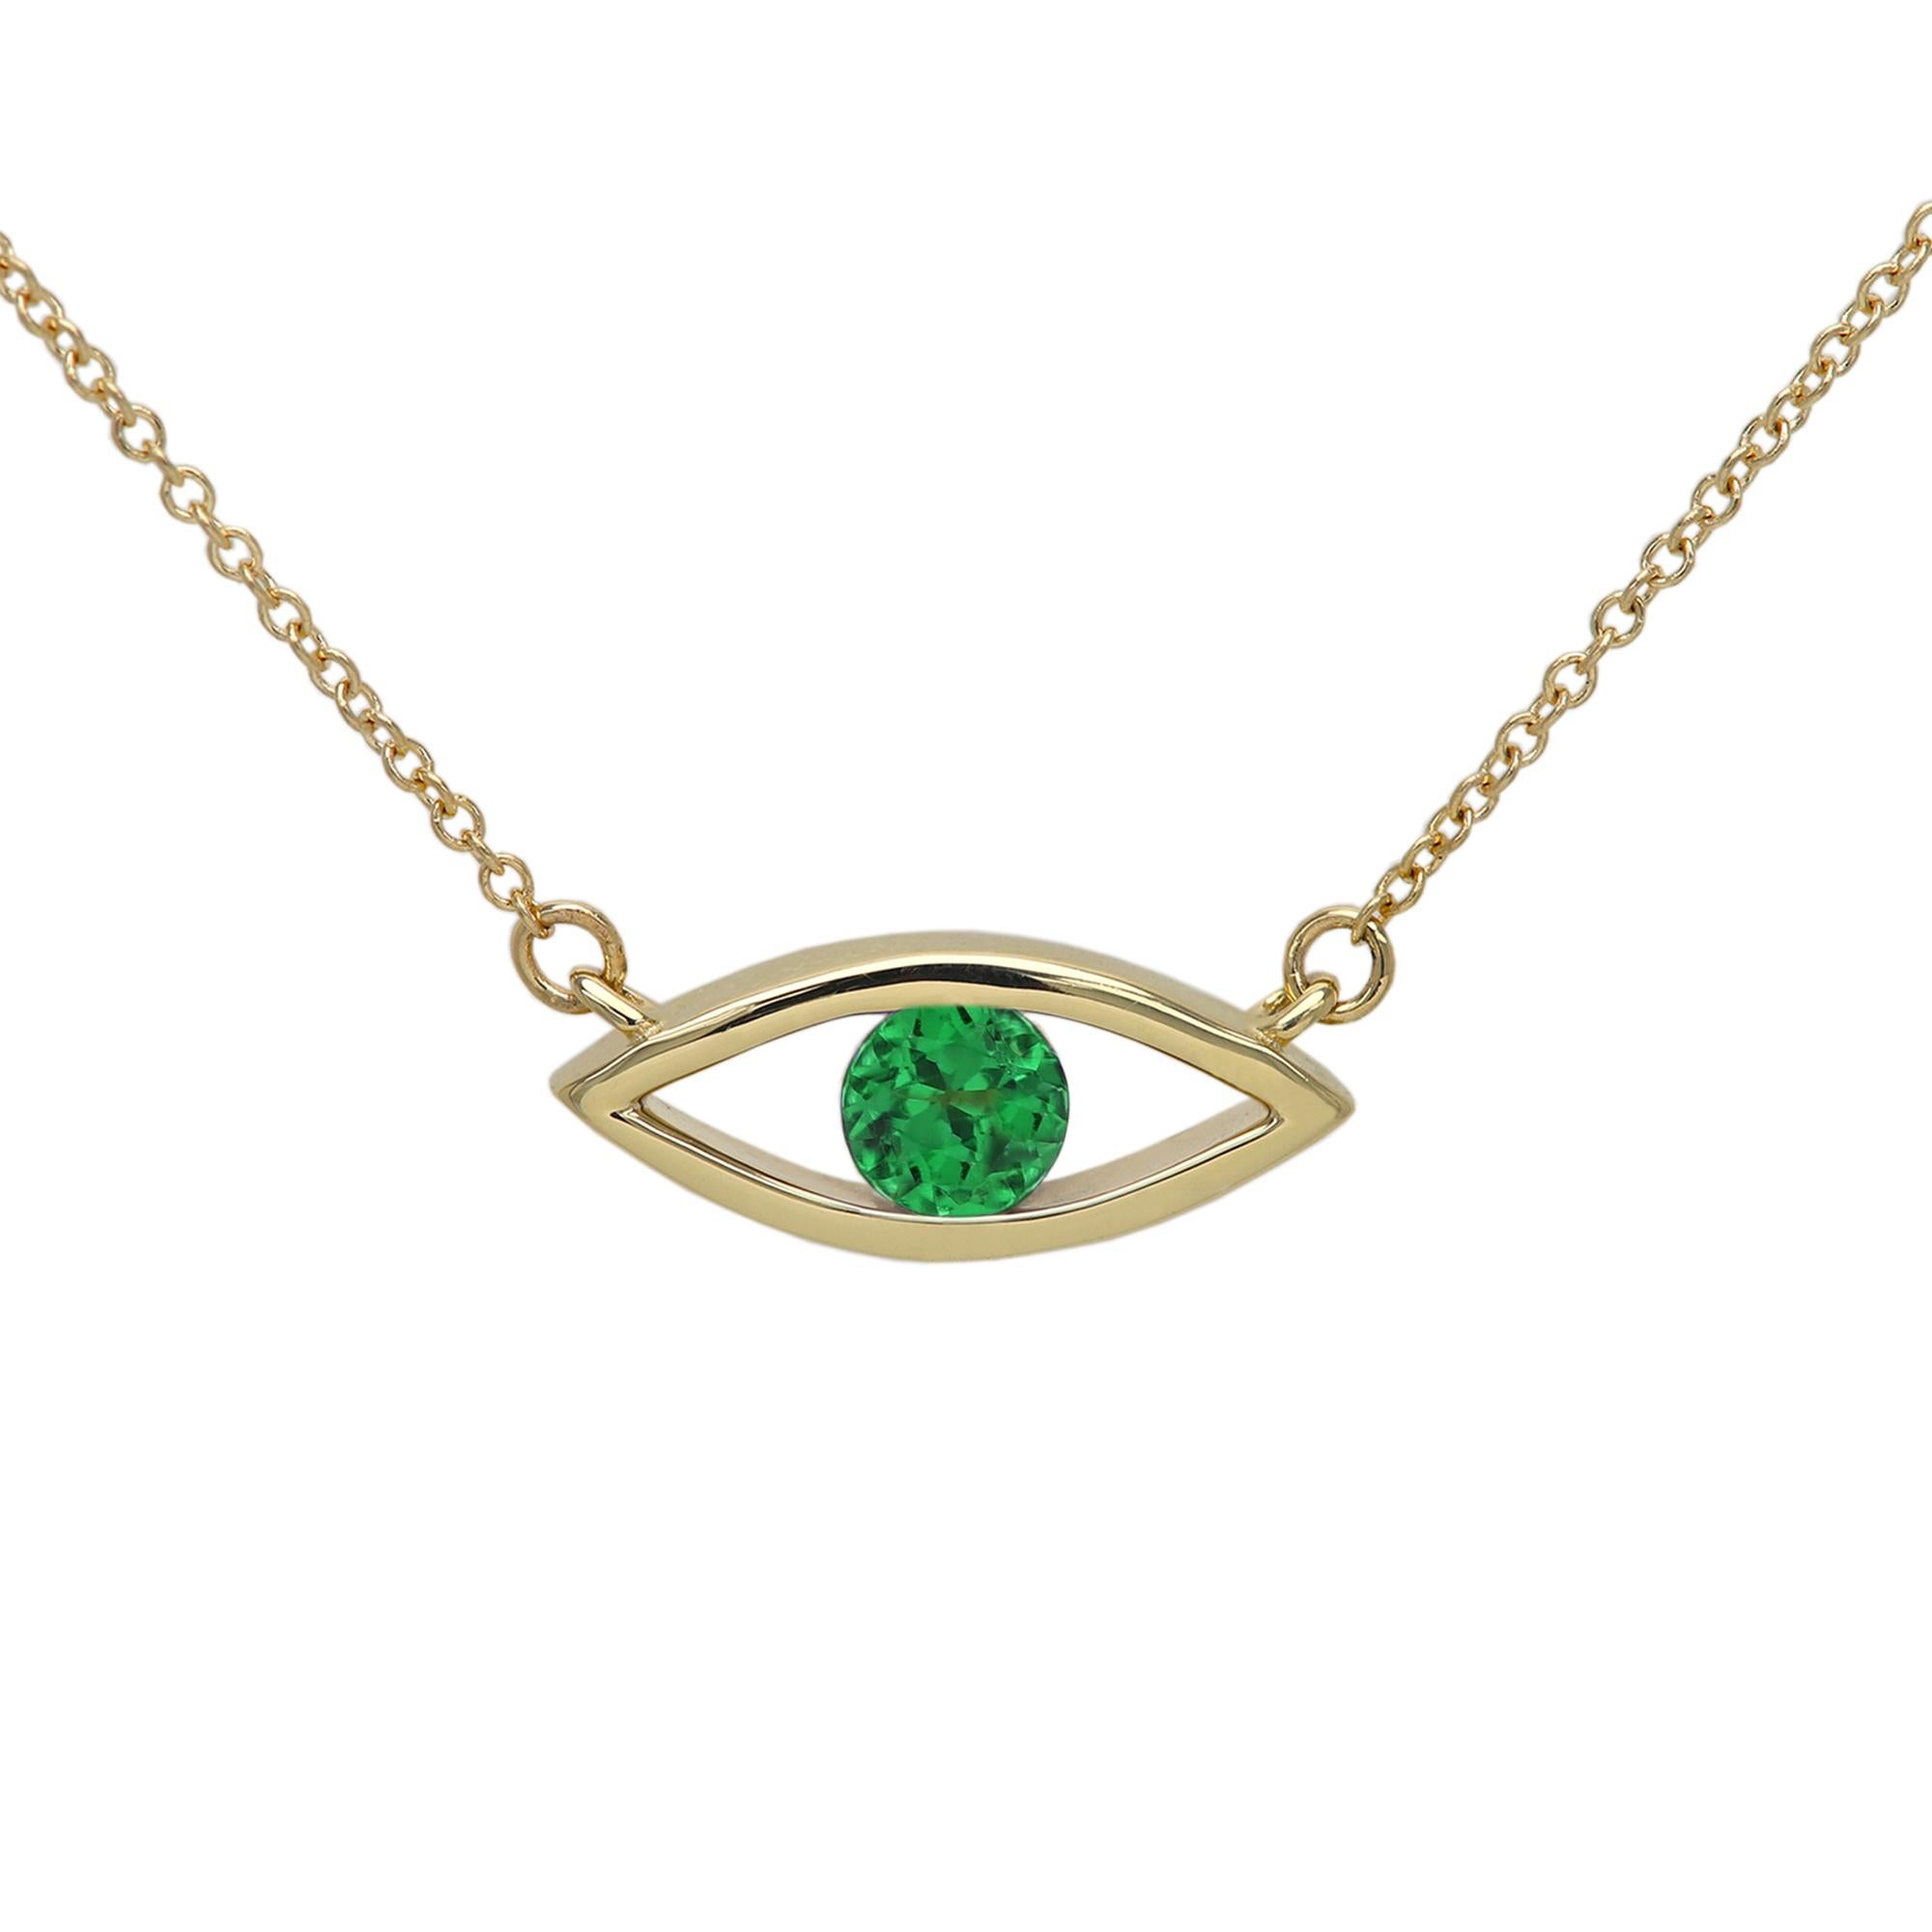 New, Very Elegant & Lovely Evil Eye Birthstone Necklace Solid 14k Yellow Gold with Natural Tsavorite gemstone 
Set in Yellow Gold Evil Eye - Good Luck & protection Necklace
Classic Cable Chain and Lobster Lock - all 14k, 
Chain Length - as your own